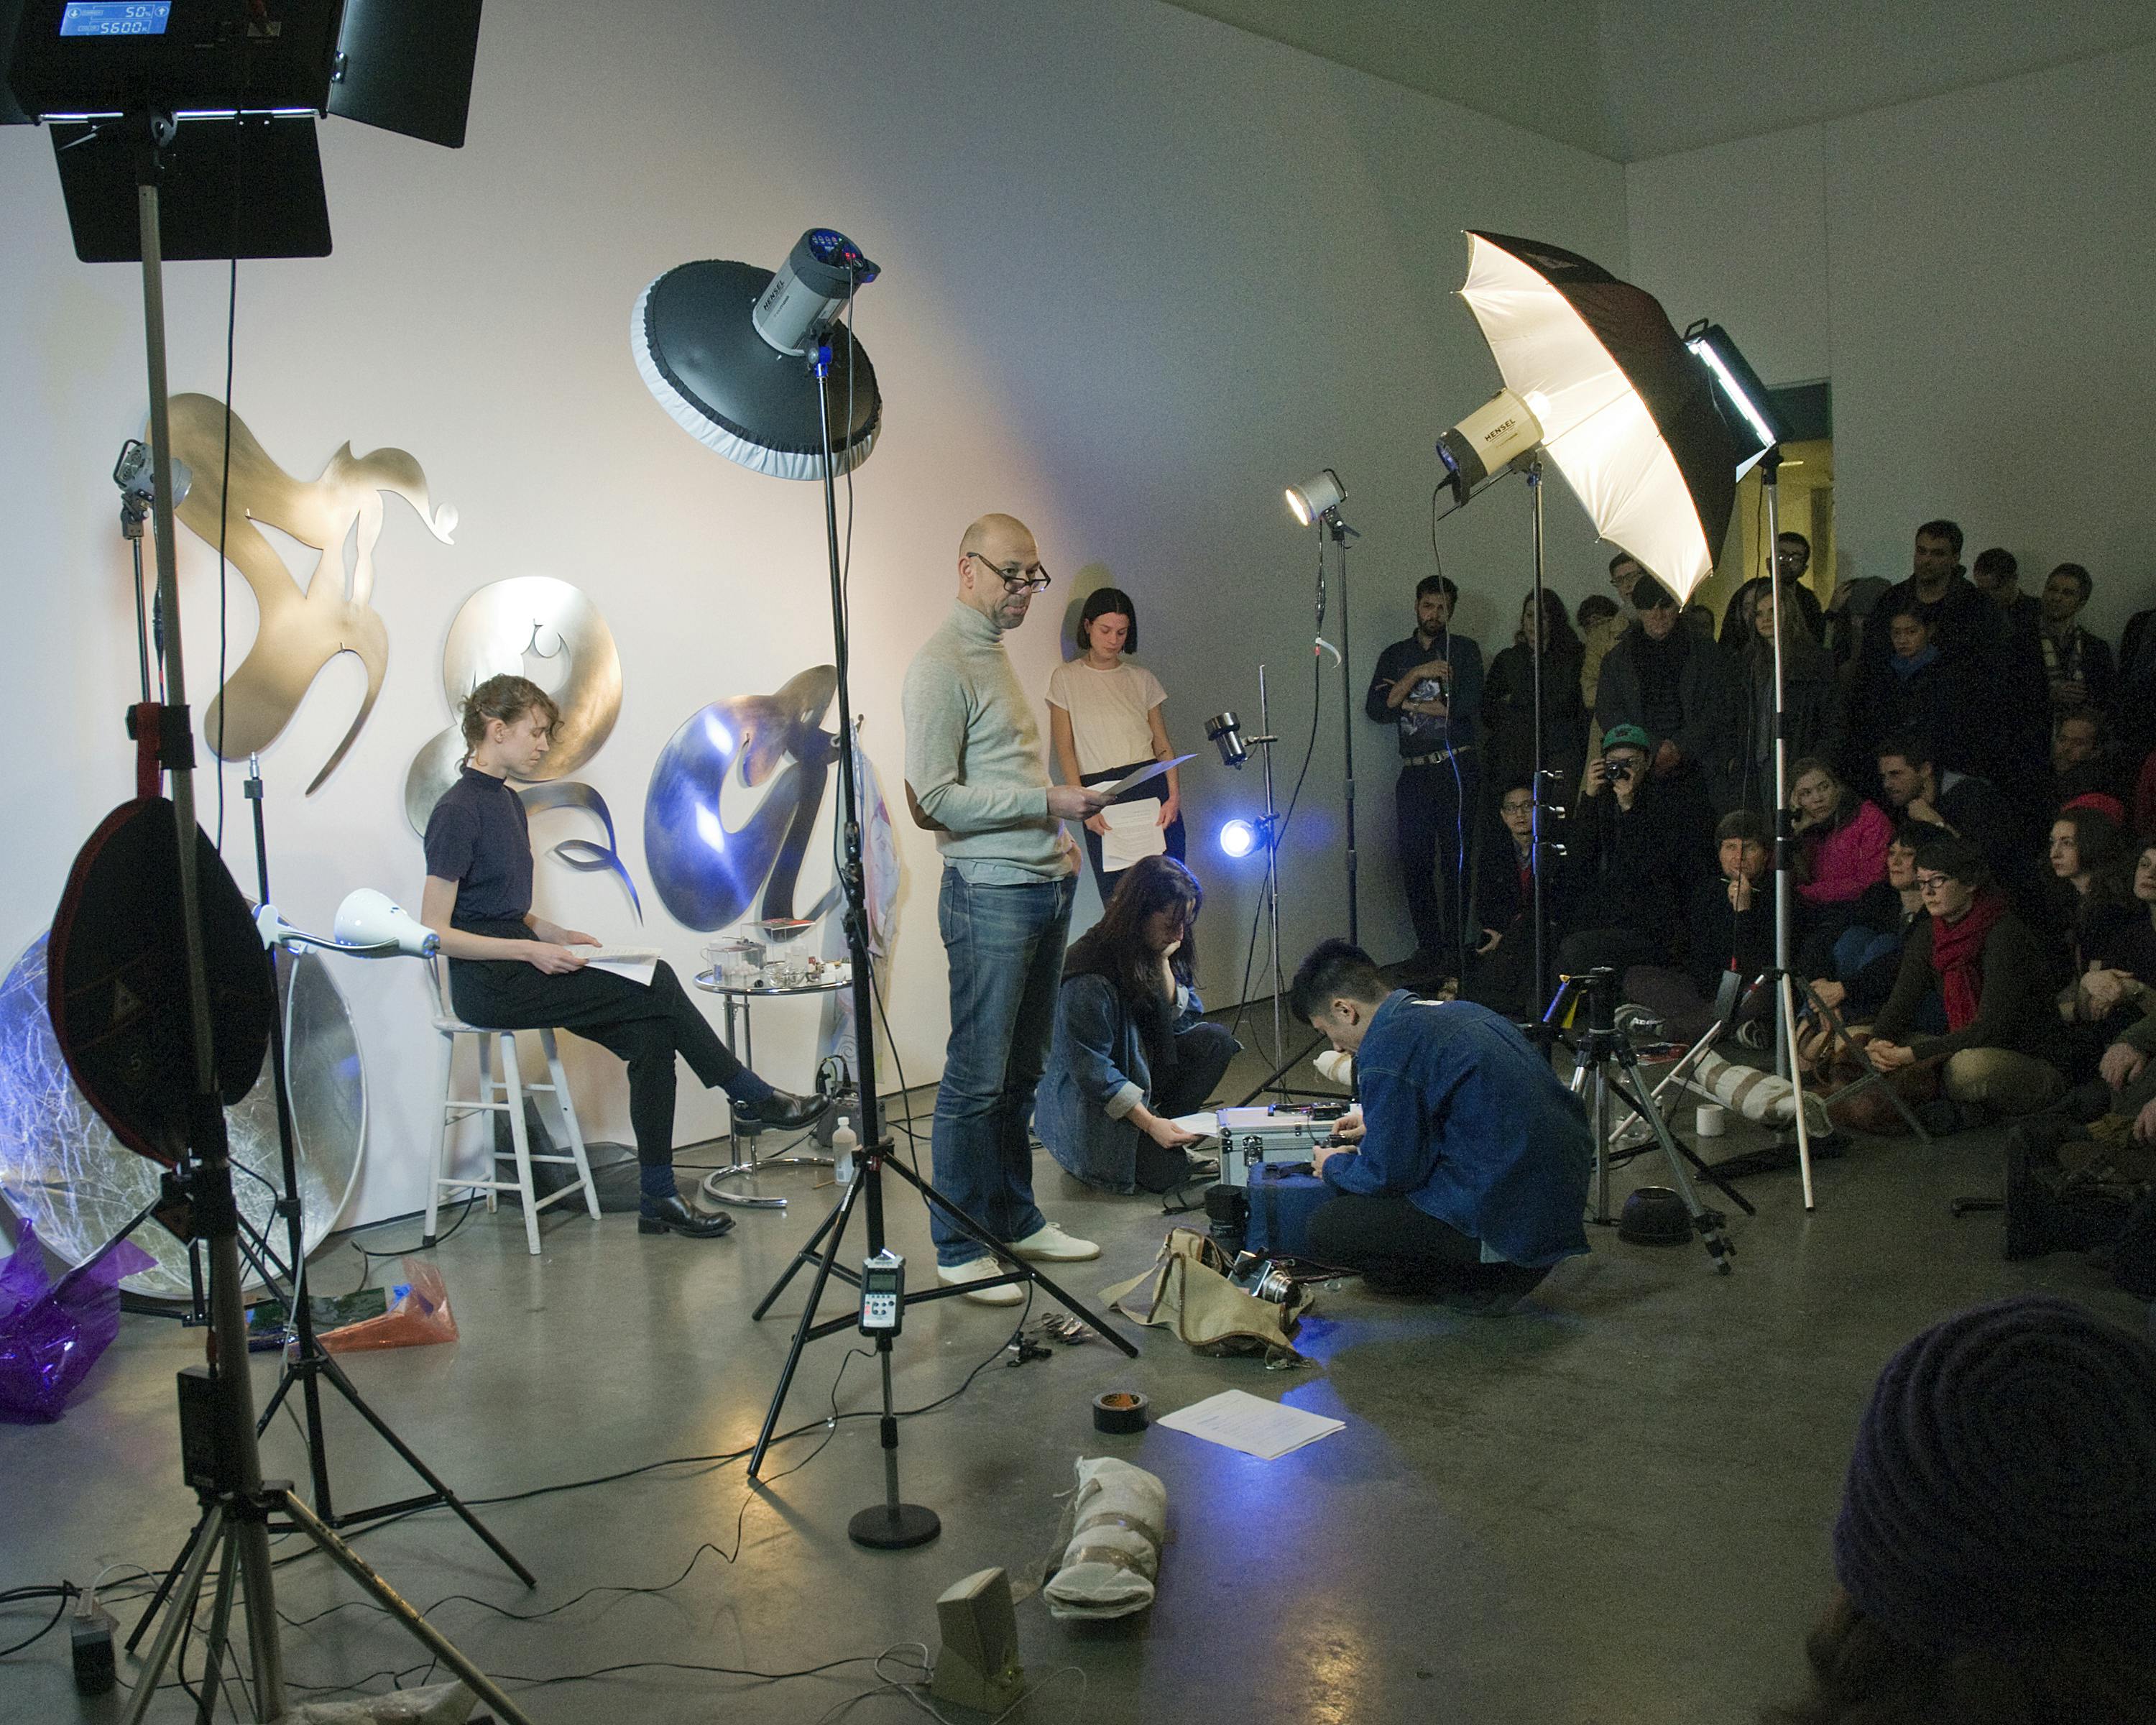 Five people are posing in a small photo booth set in front of a wall in a gallery. A person standing in the middle of the booth looks at the audience sitting around the set.